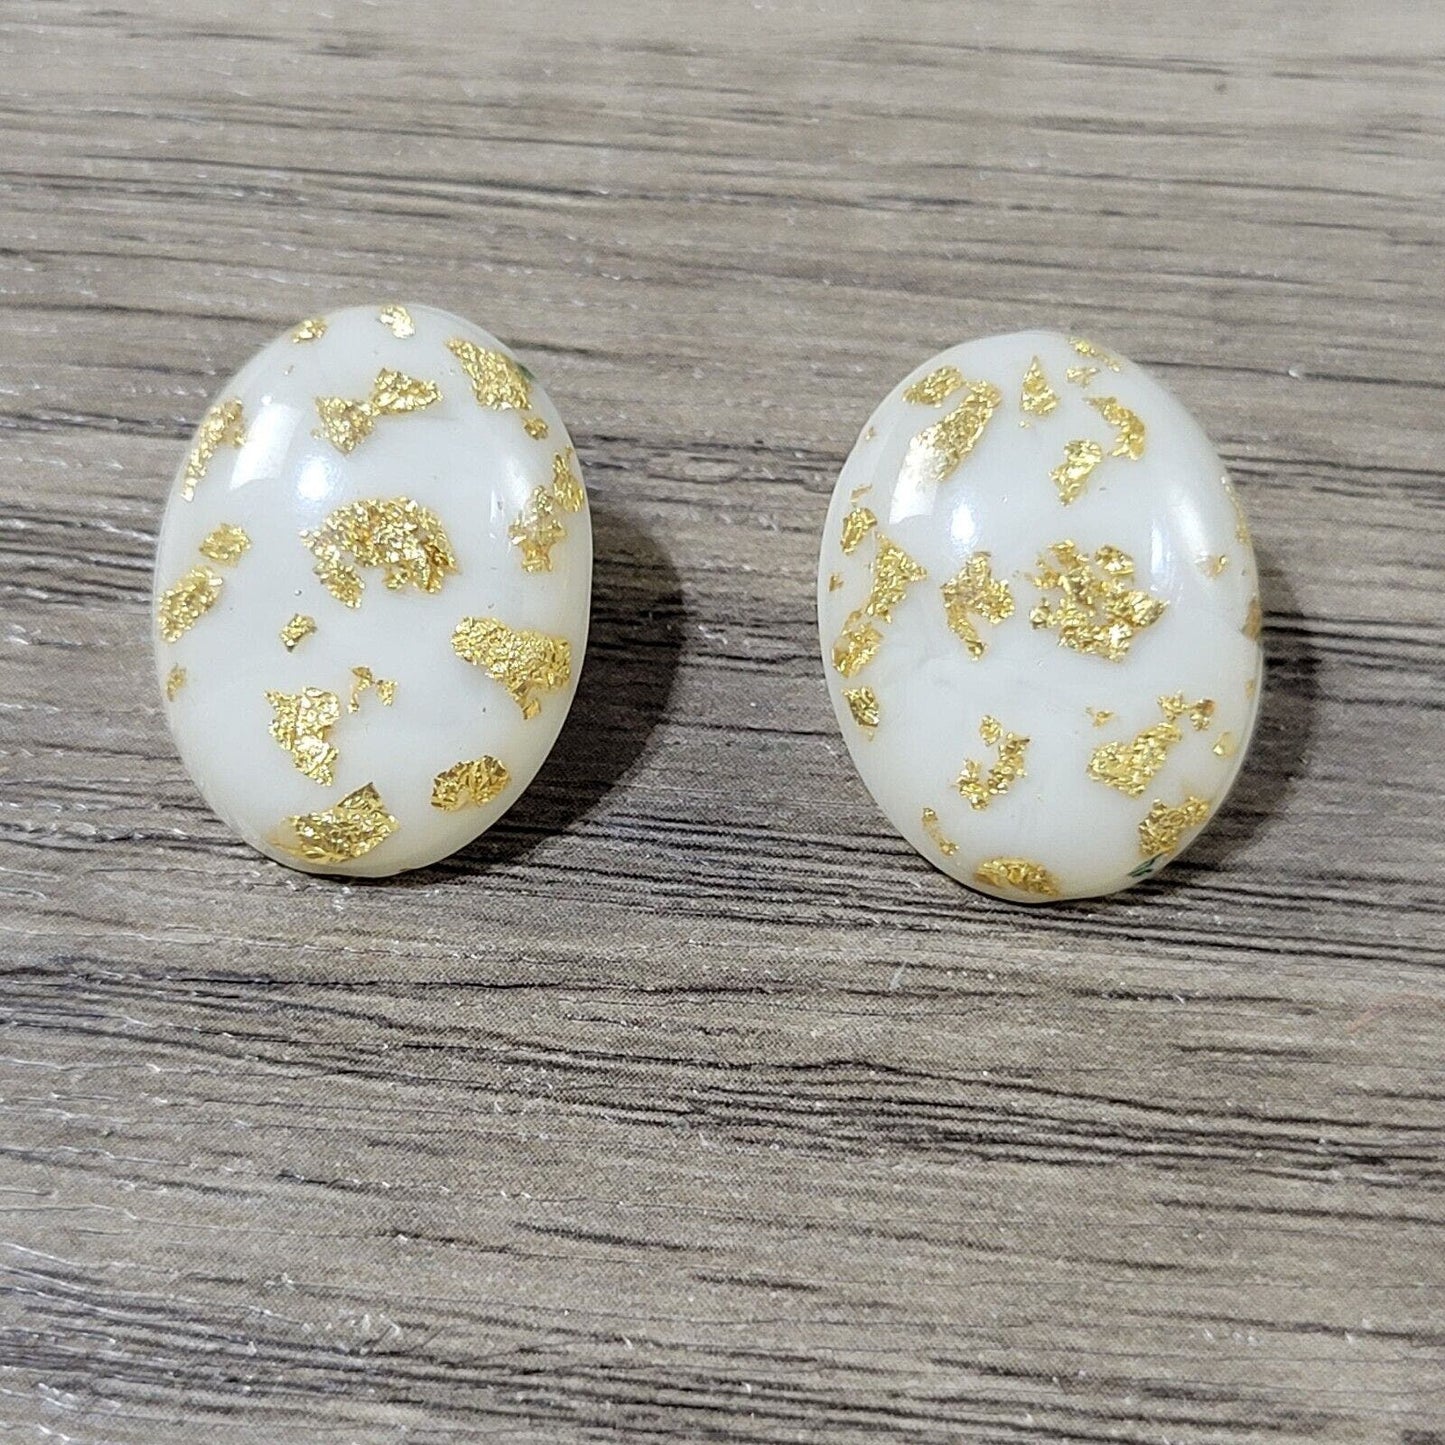 Vintage 1960s clip-on earrings gold flake confetti lucite ovals